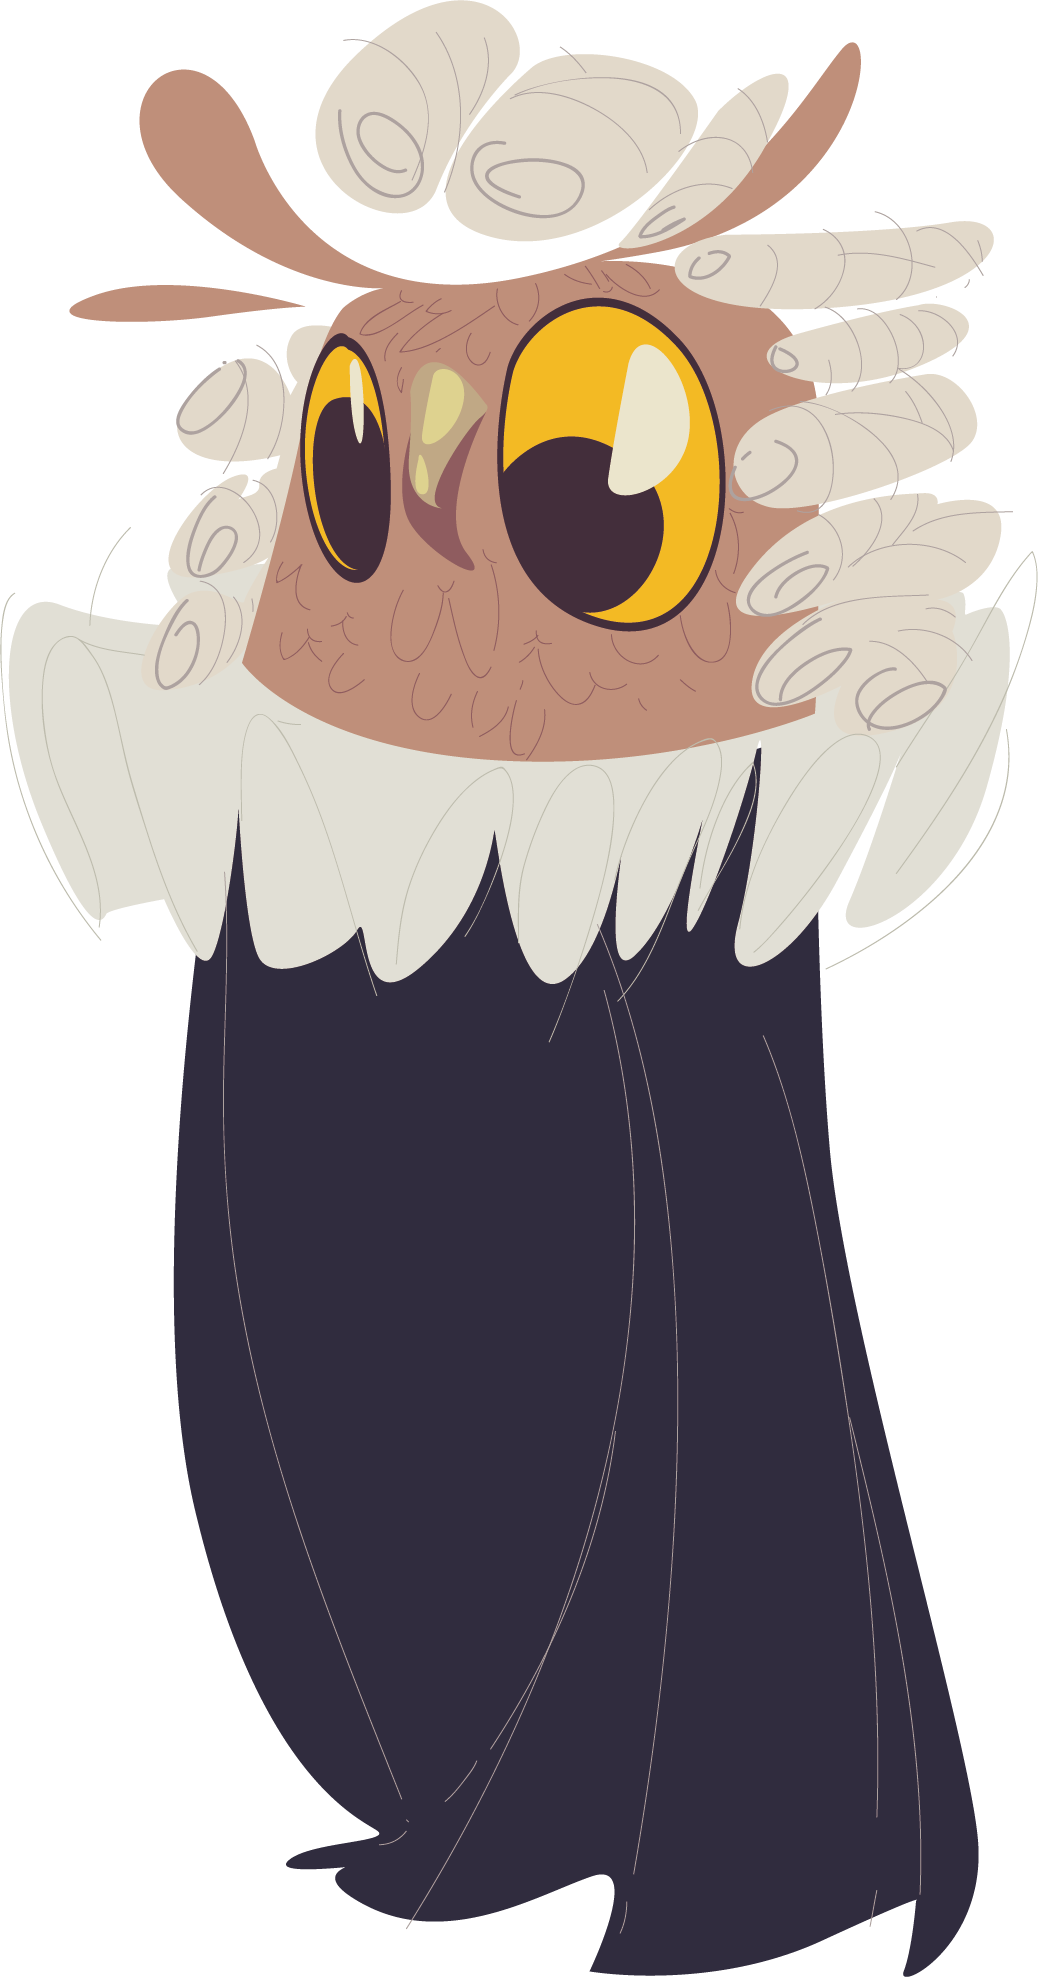 Owl Vector Cartoon Illustration Sparrow PNG Image High Quality Clipart